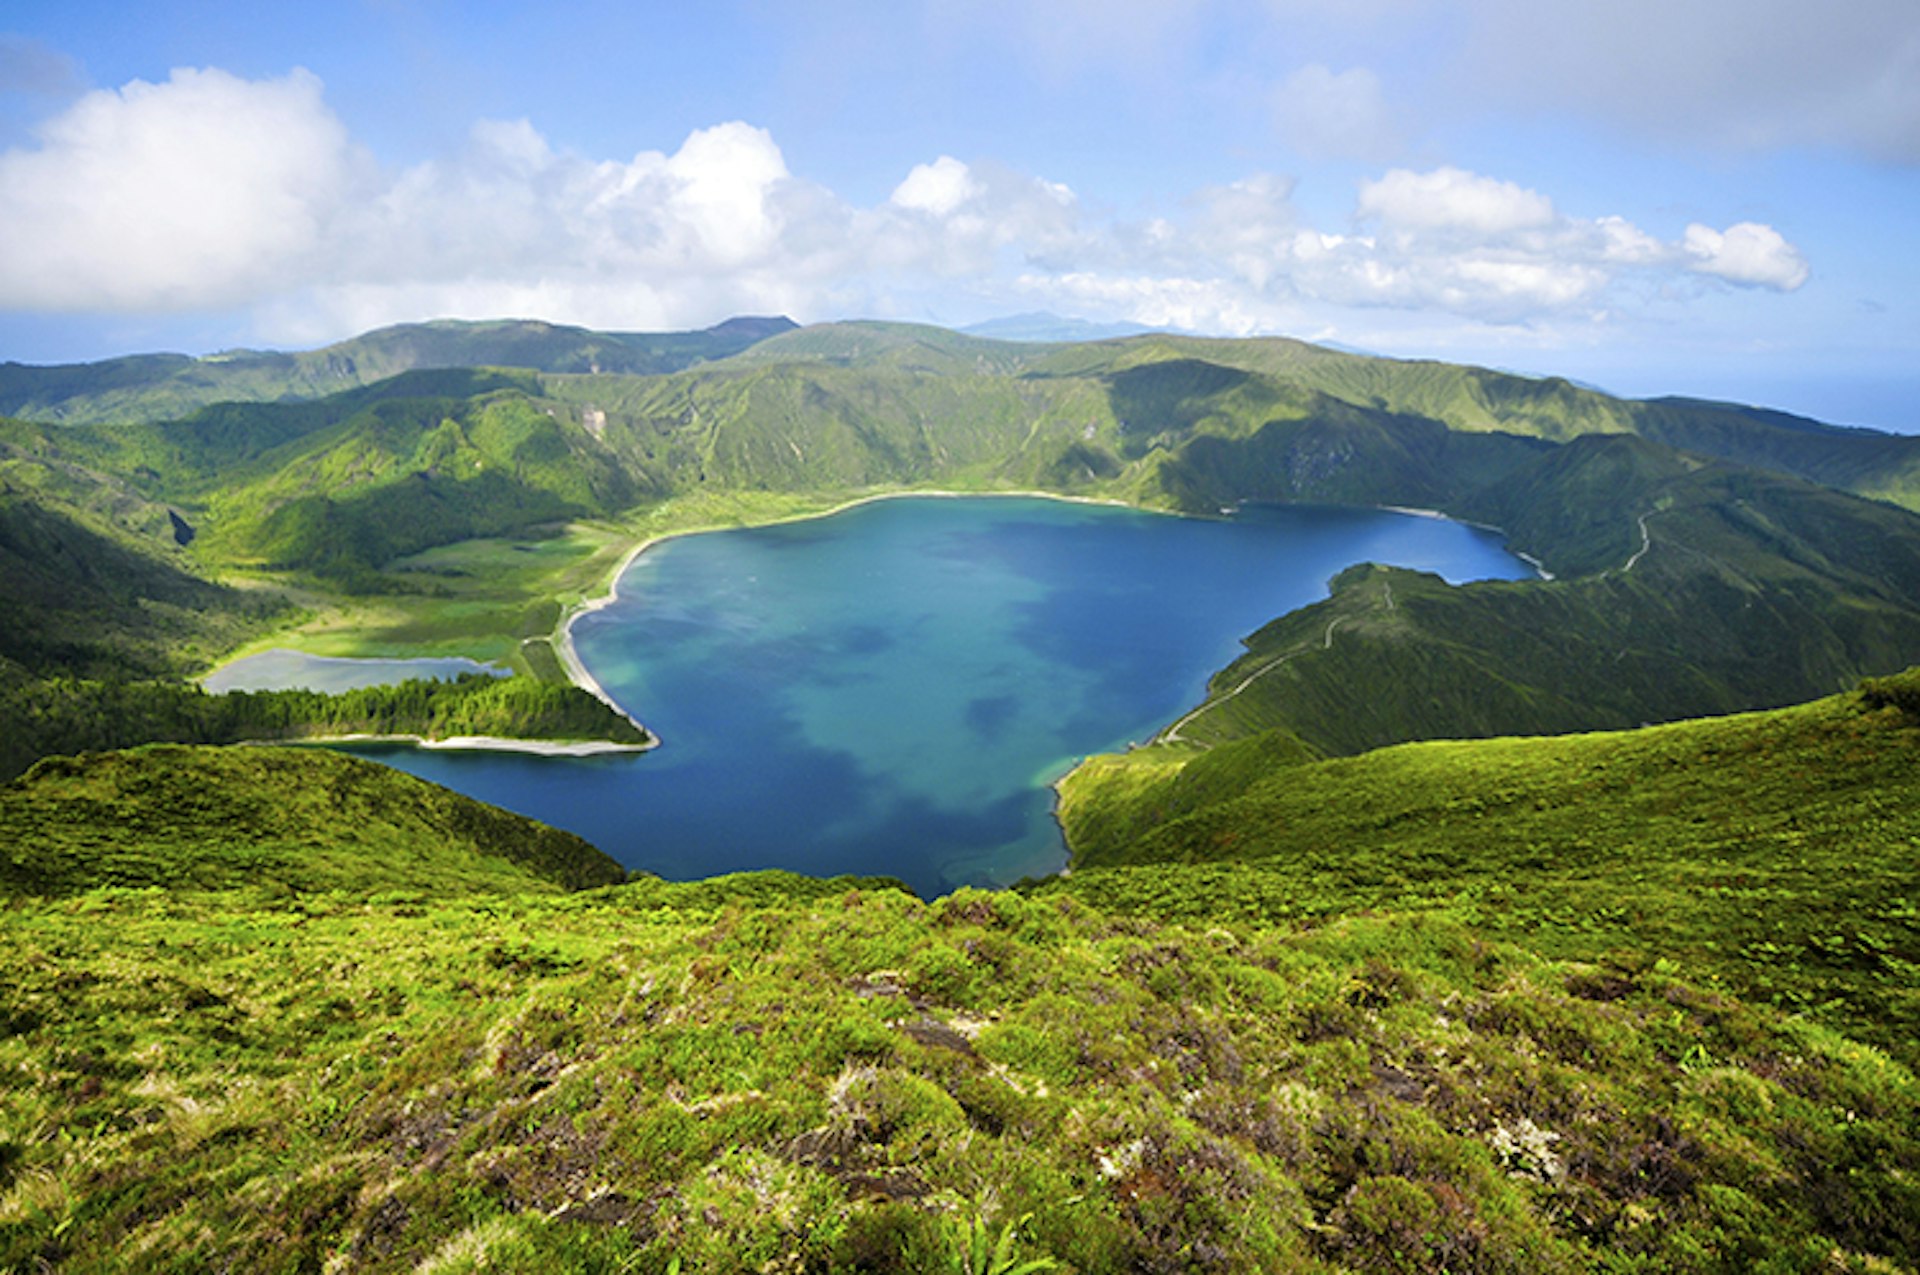 The Azores are famed for their eye-popping crater lakes. Image by mgokalp / iStock / Getty Images